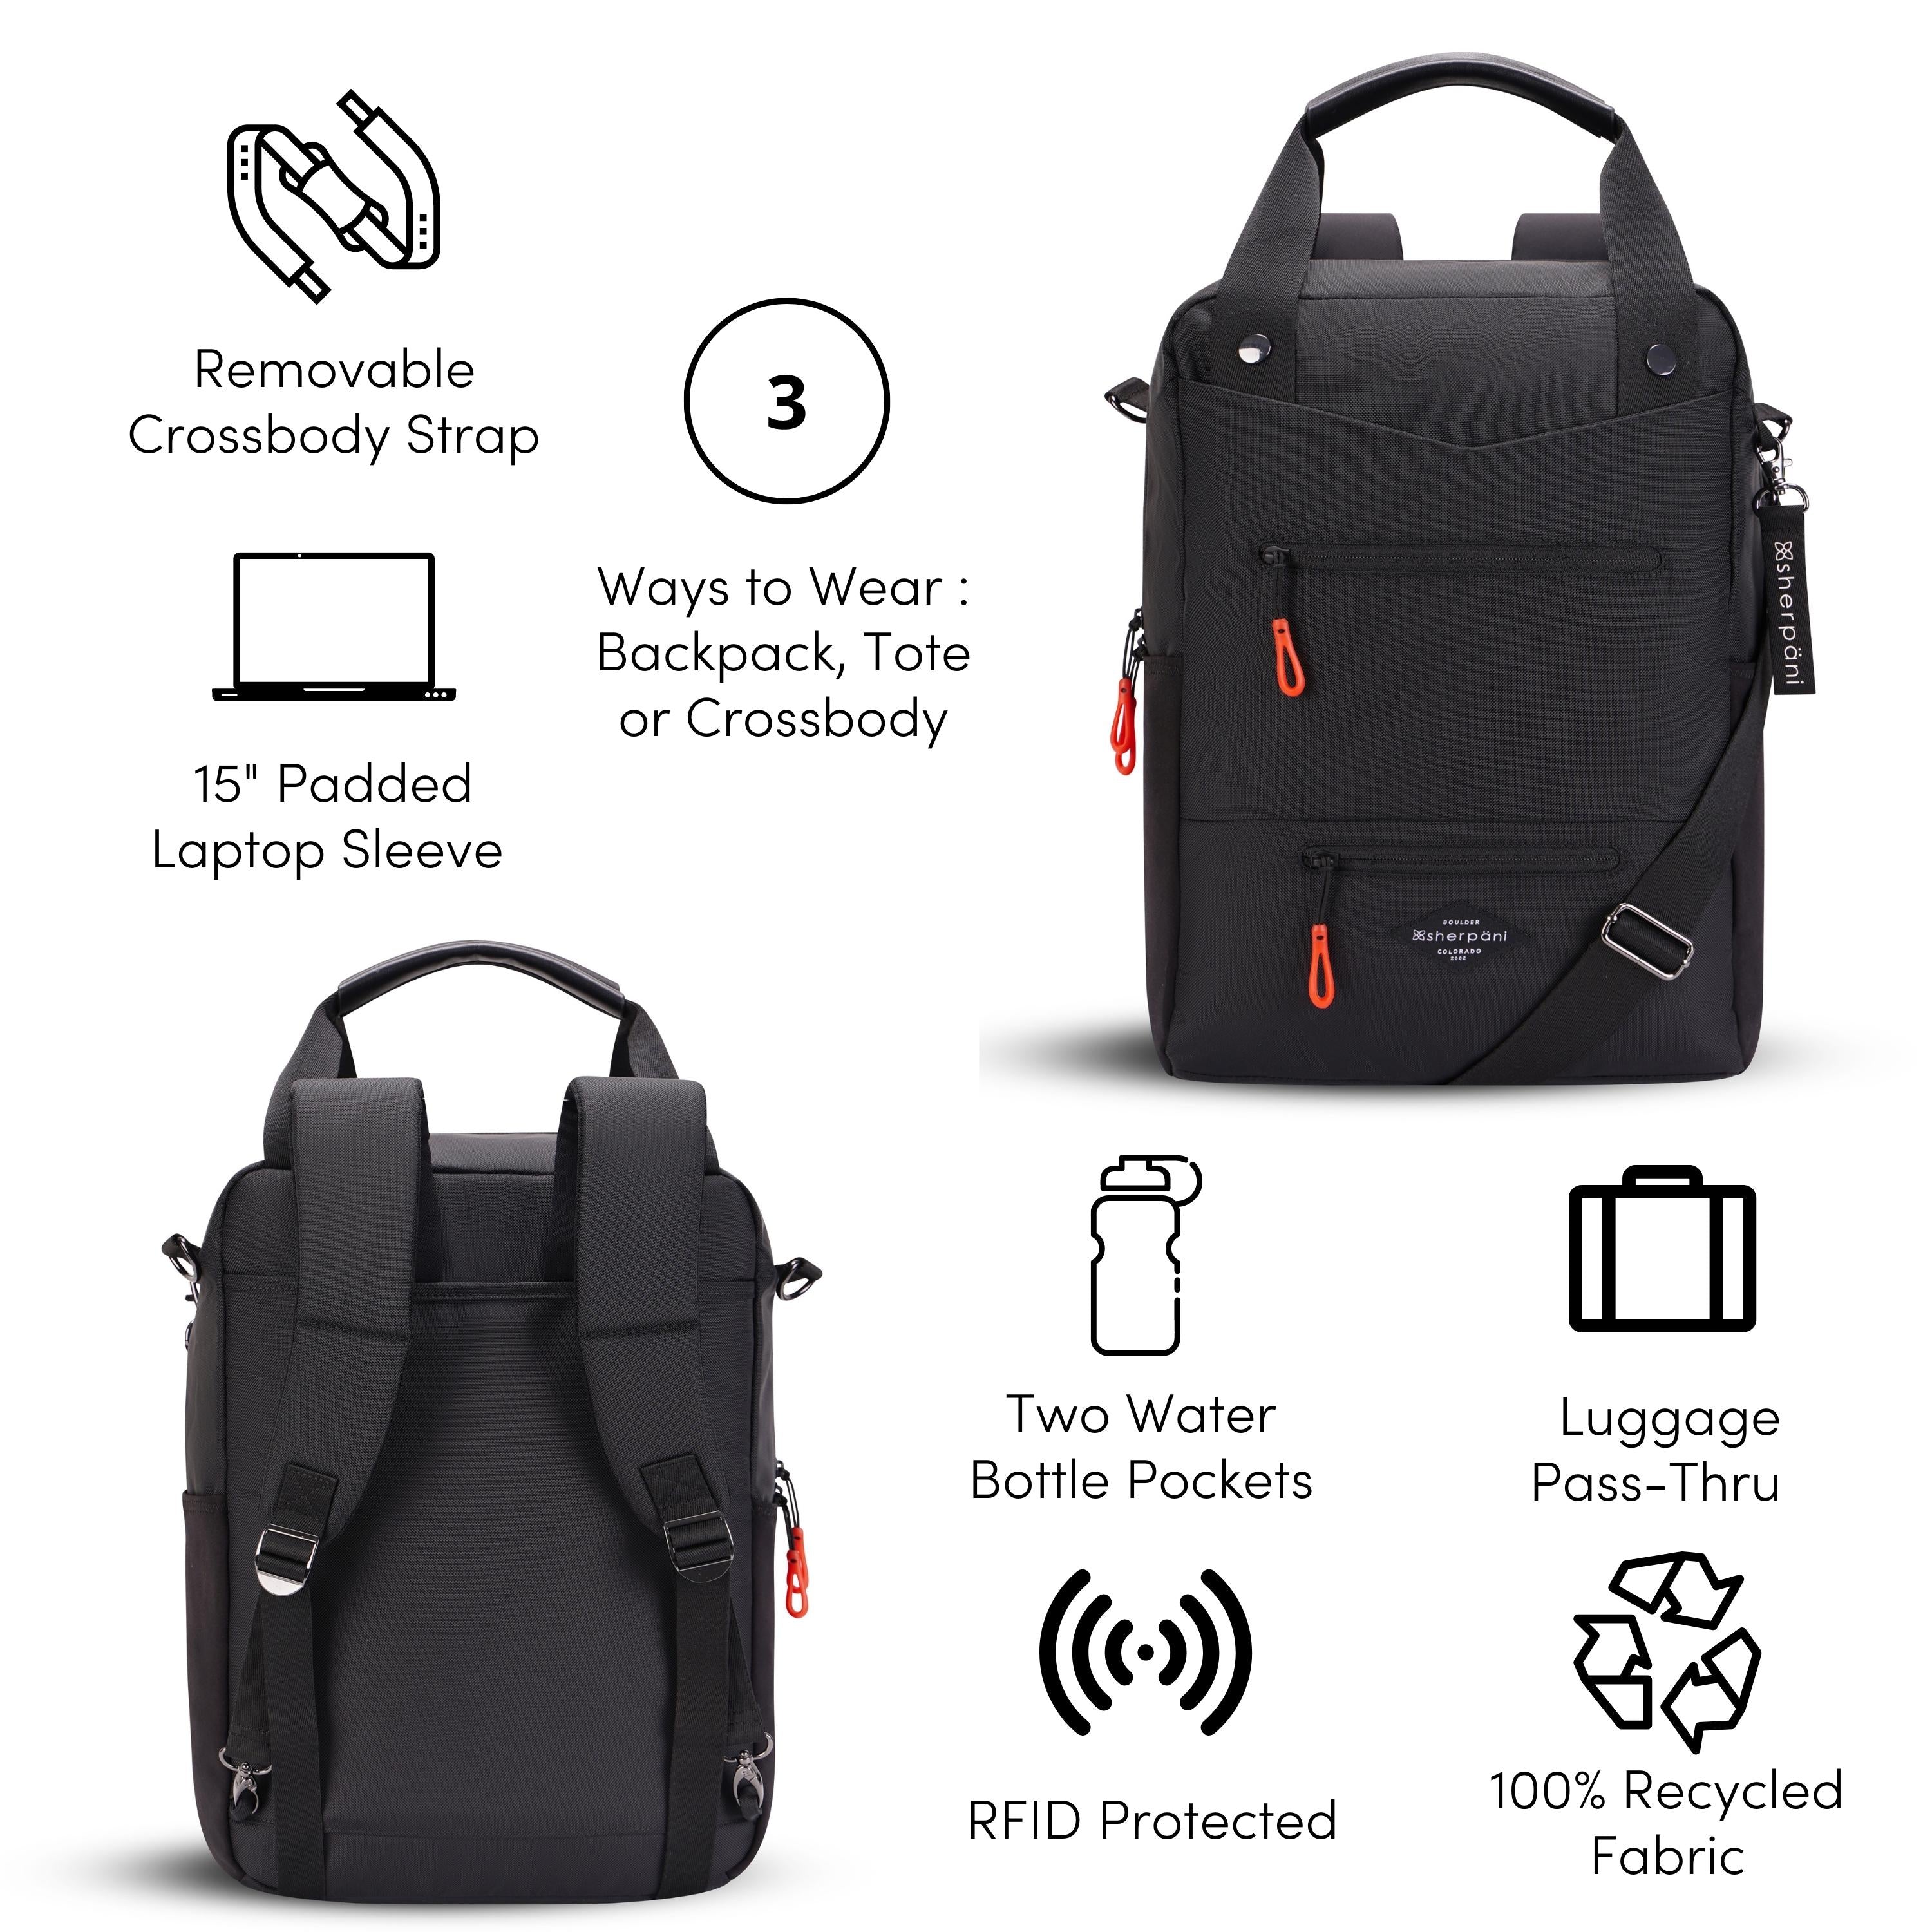 A Graphic showing the features of Sherpani’s three-in-one bag, the Camden in Raven. There is a front and back view of the bag. The following features are highlighted with corresponding graphics: Removable Crossbody Strap, 15&quot; Padded Laptop Sleeve, Three Ways to Wear: Backpack, Tote or Crossbody, Two Water Bottle Pockets, RFID Protected, Luggage Pass-Thru, 100% Recycled Fabric